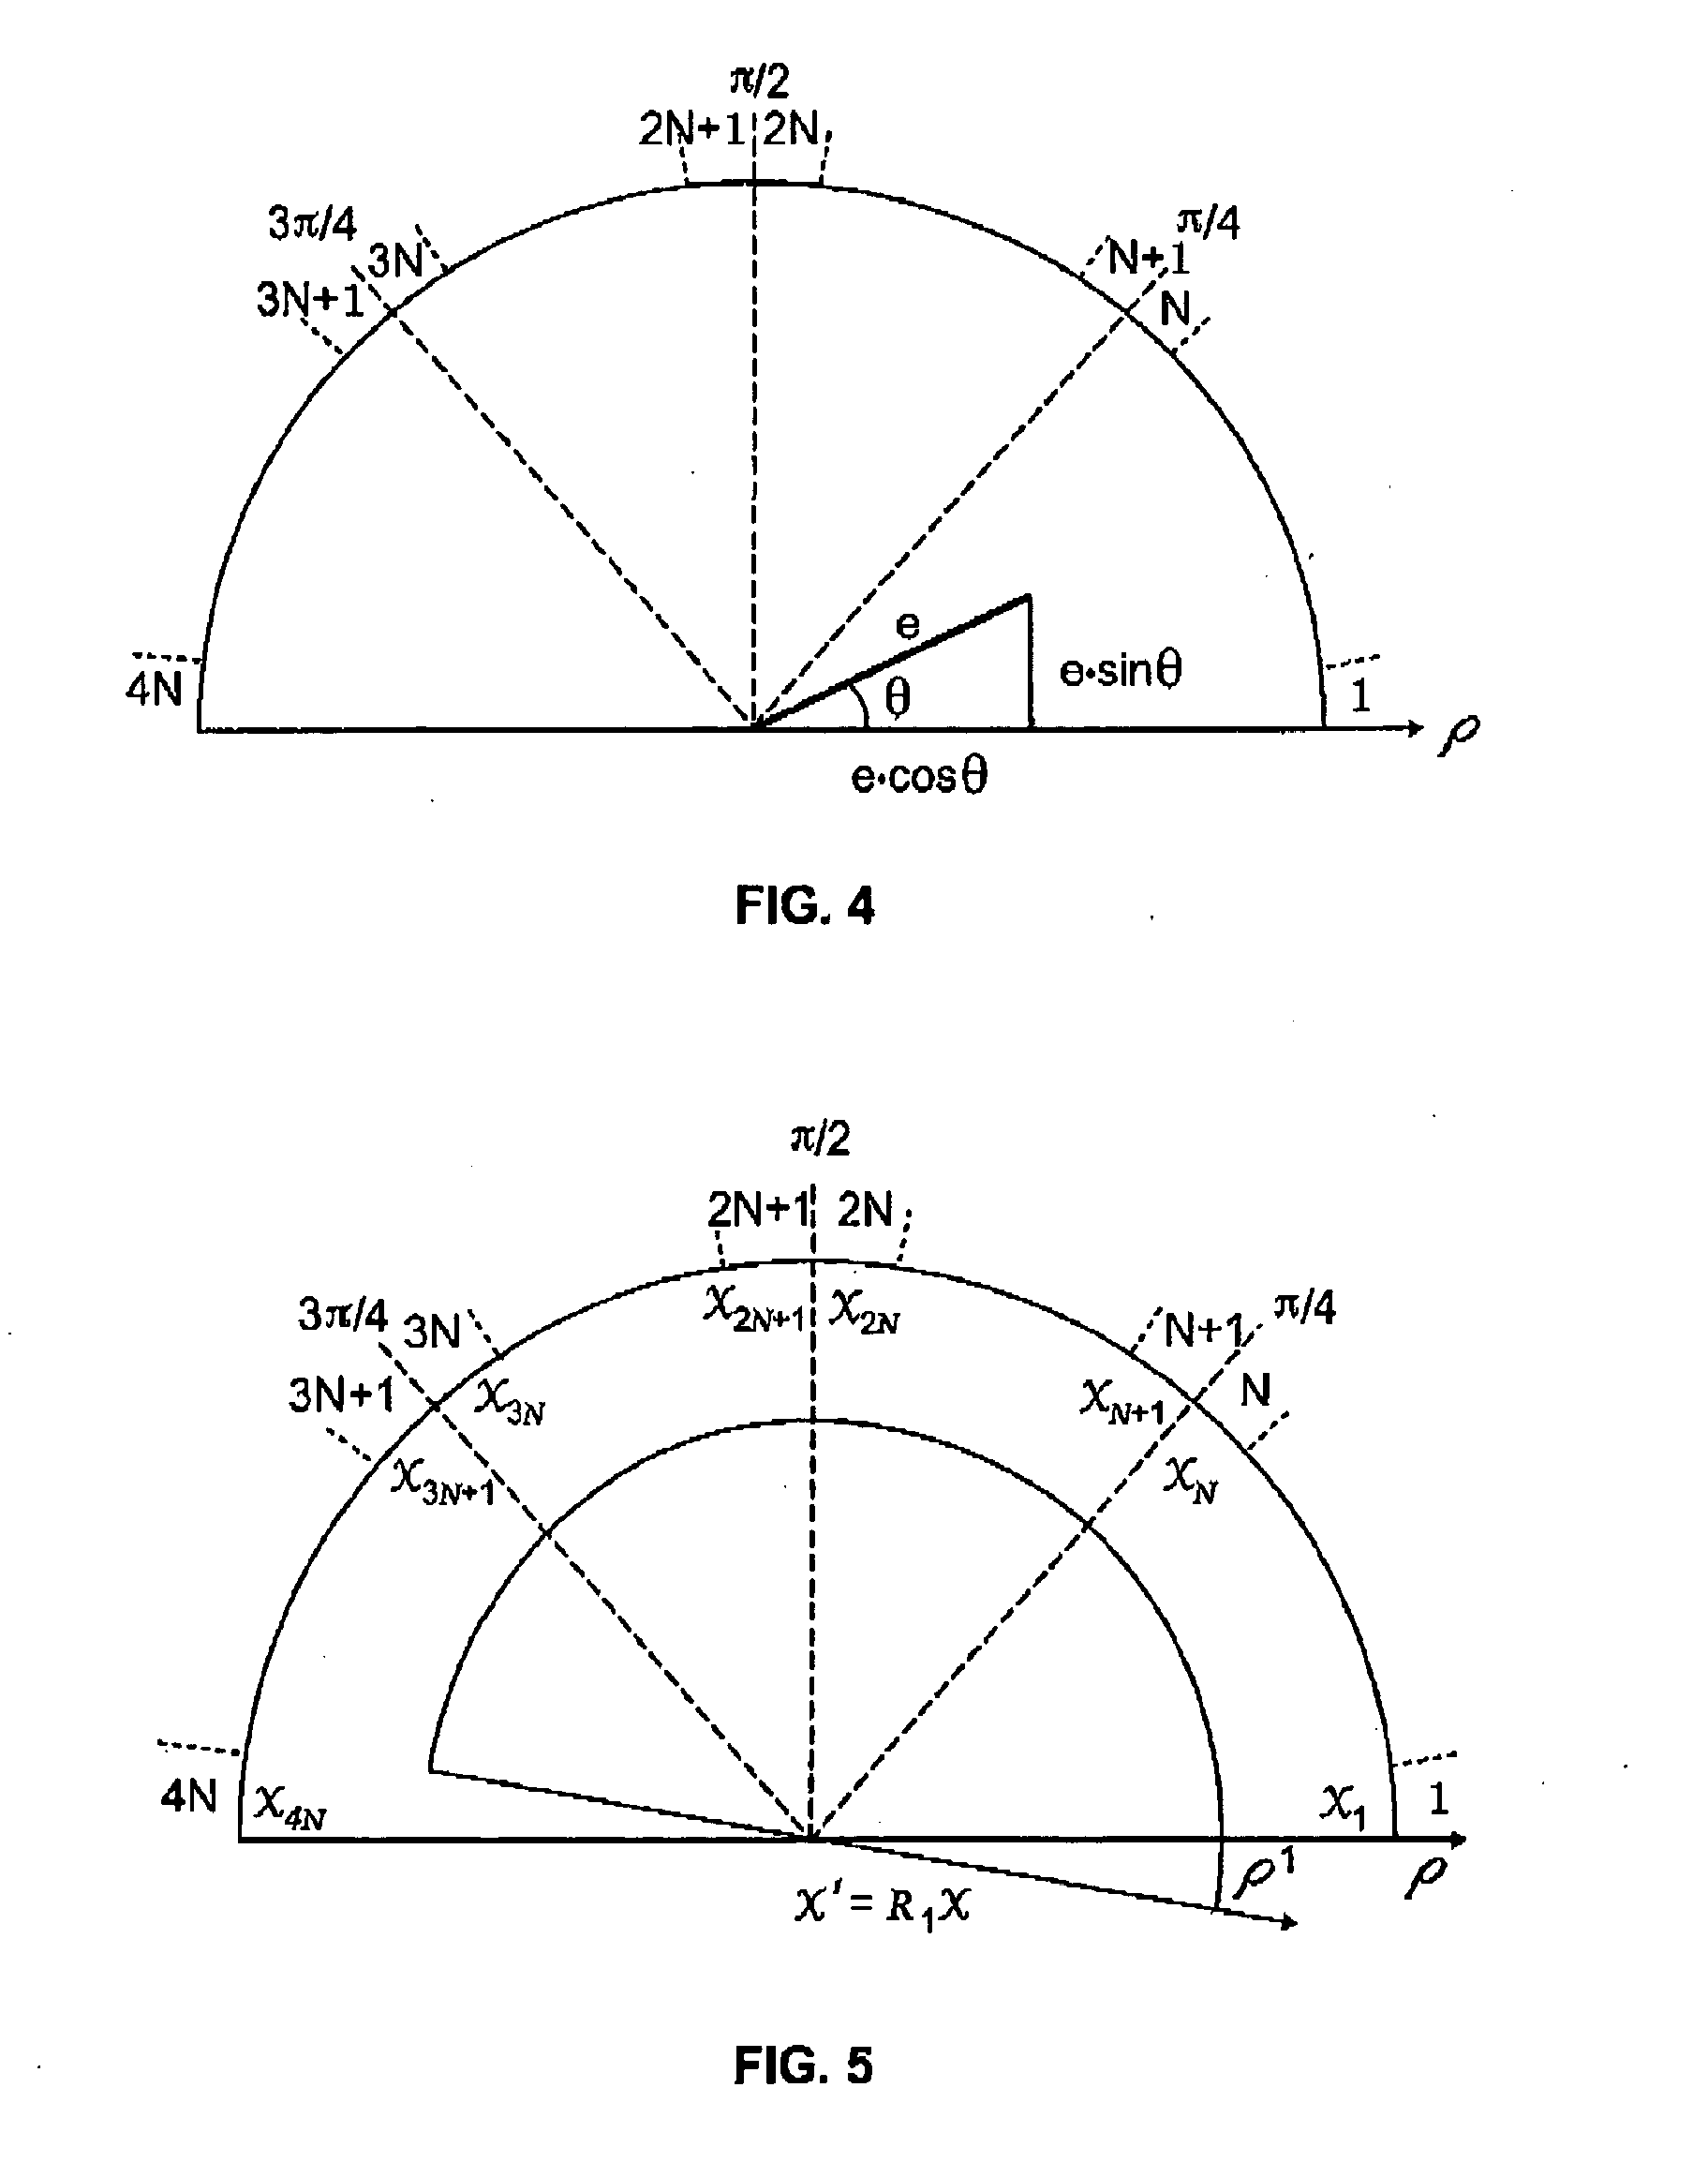 System and methods for using a dynamic gamma knife for radiosurgery